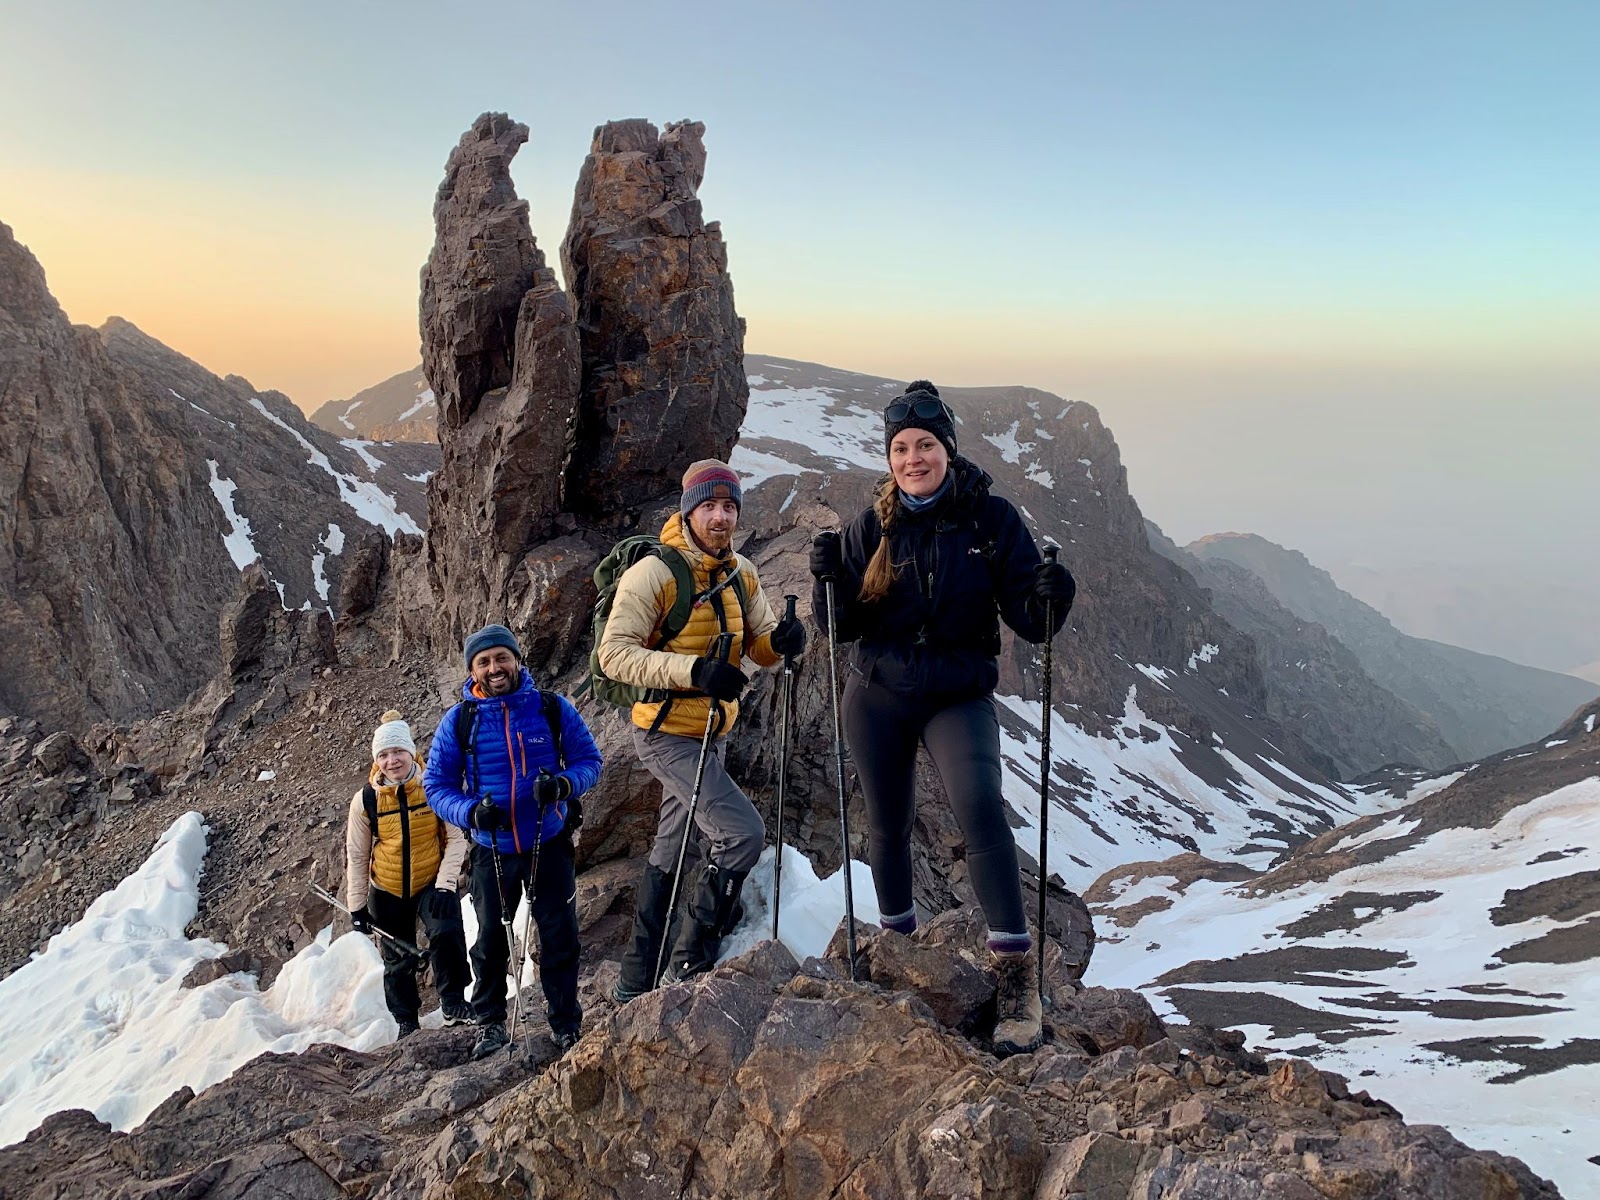 Hikers pose in the High Atlas Mountains at sunrise.